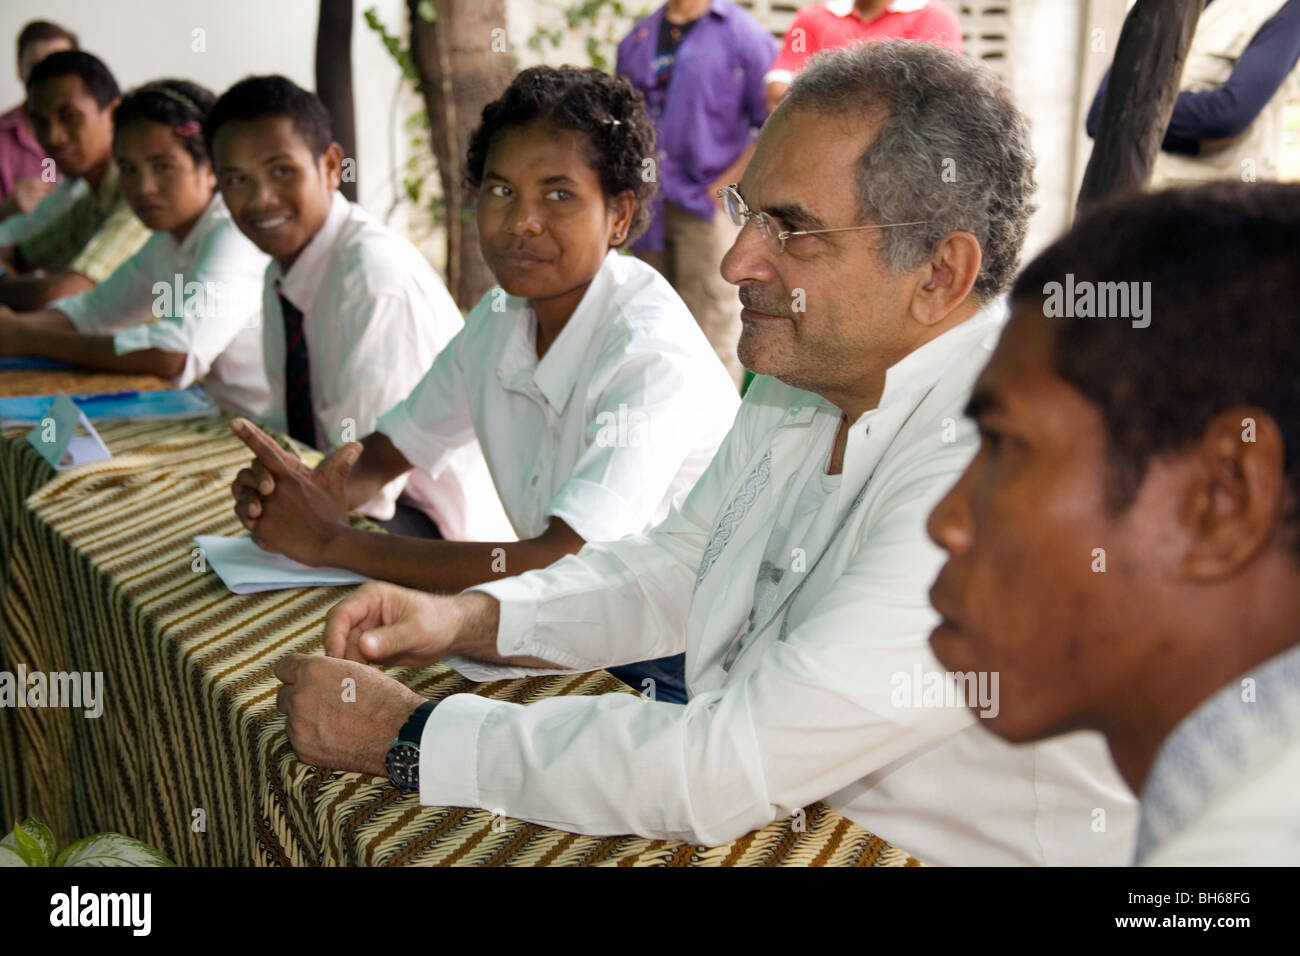 President of East Timor, Jose Ramos-Horta, 'man of the people' joins a class of students, Dili, August 2007 Stock Photo